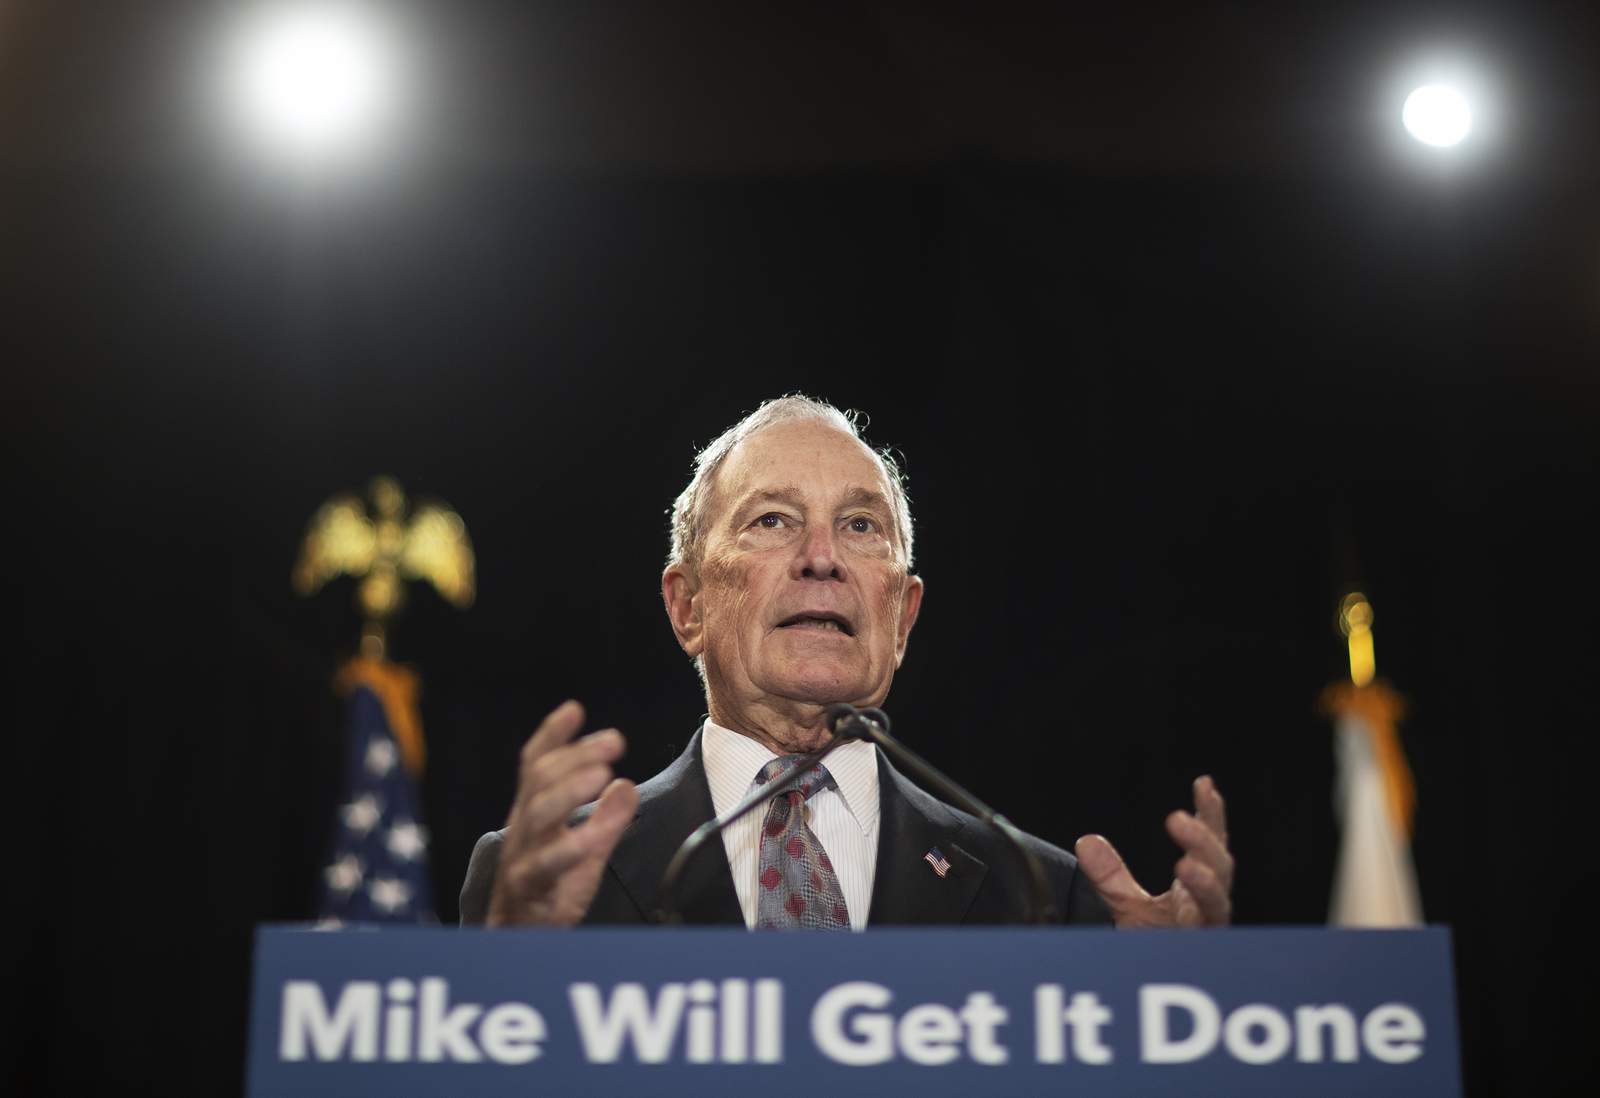 How Bloomberg's $100 million Florida bet may shape campaign